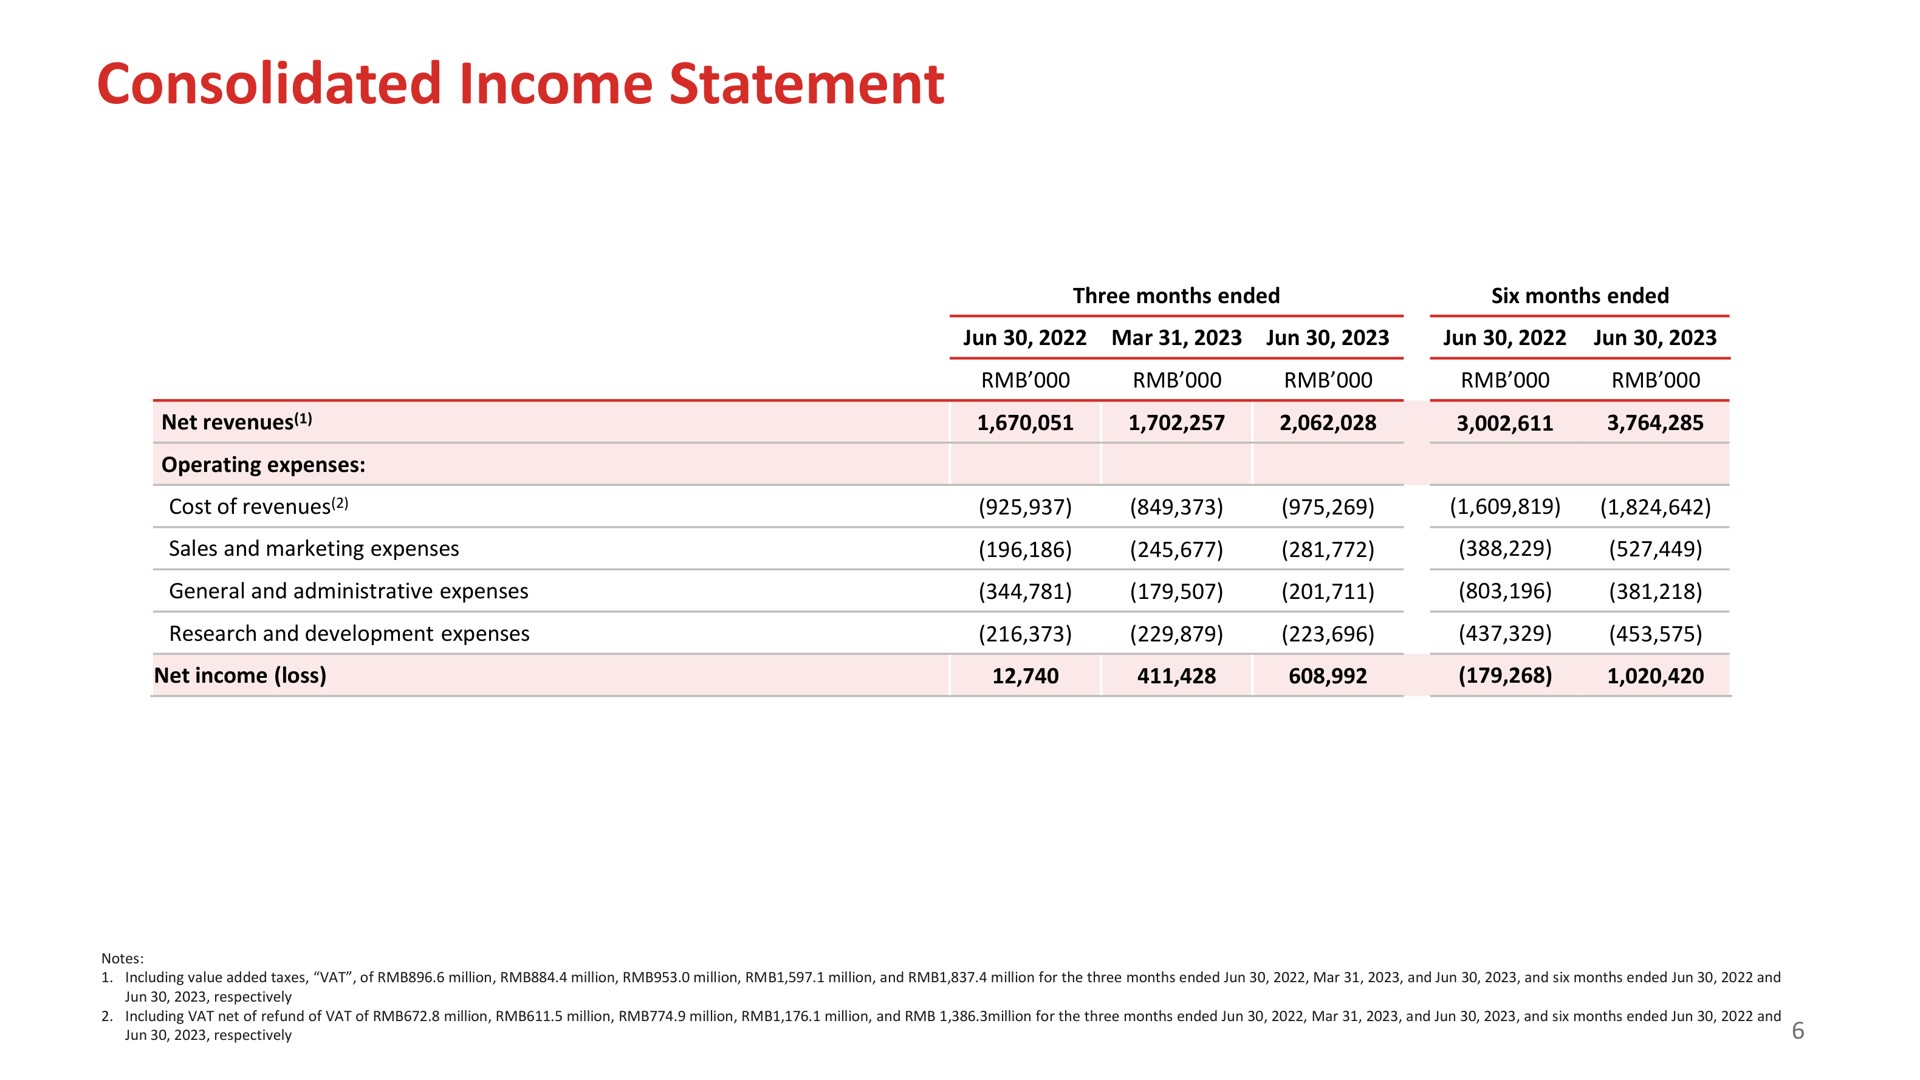 consolidated income statement | Full Track Alliance